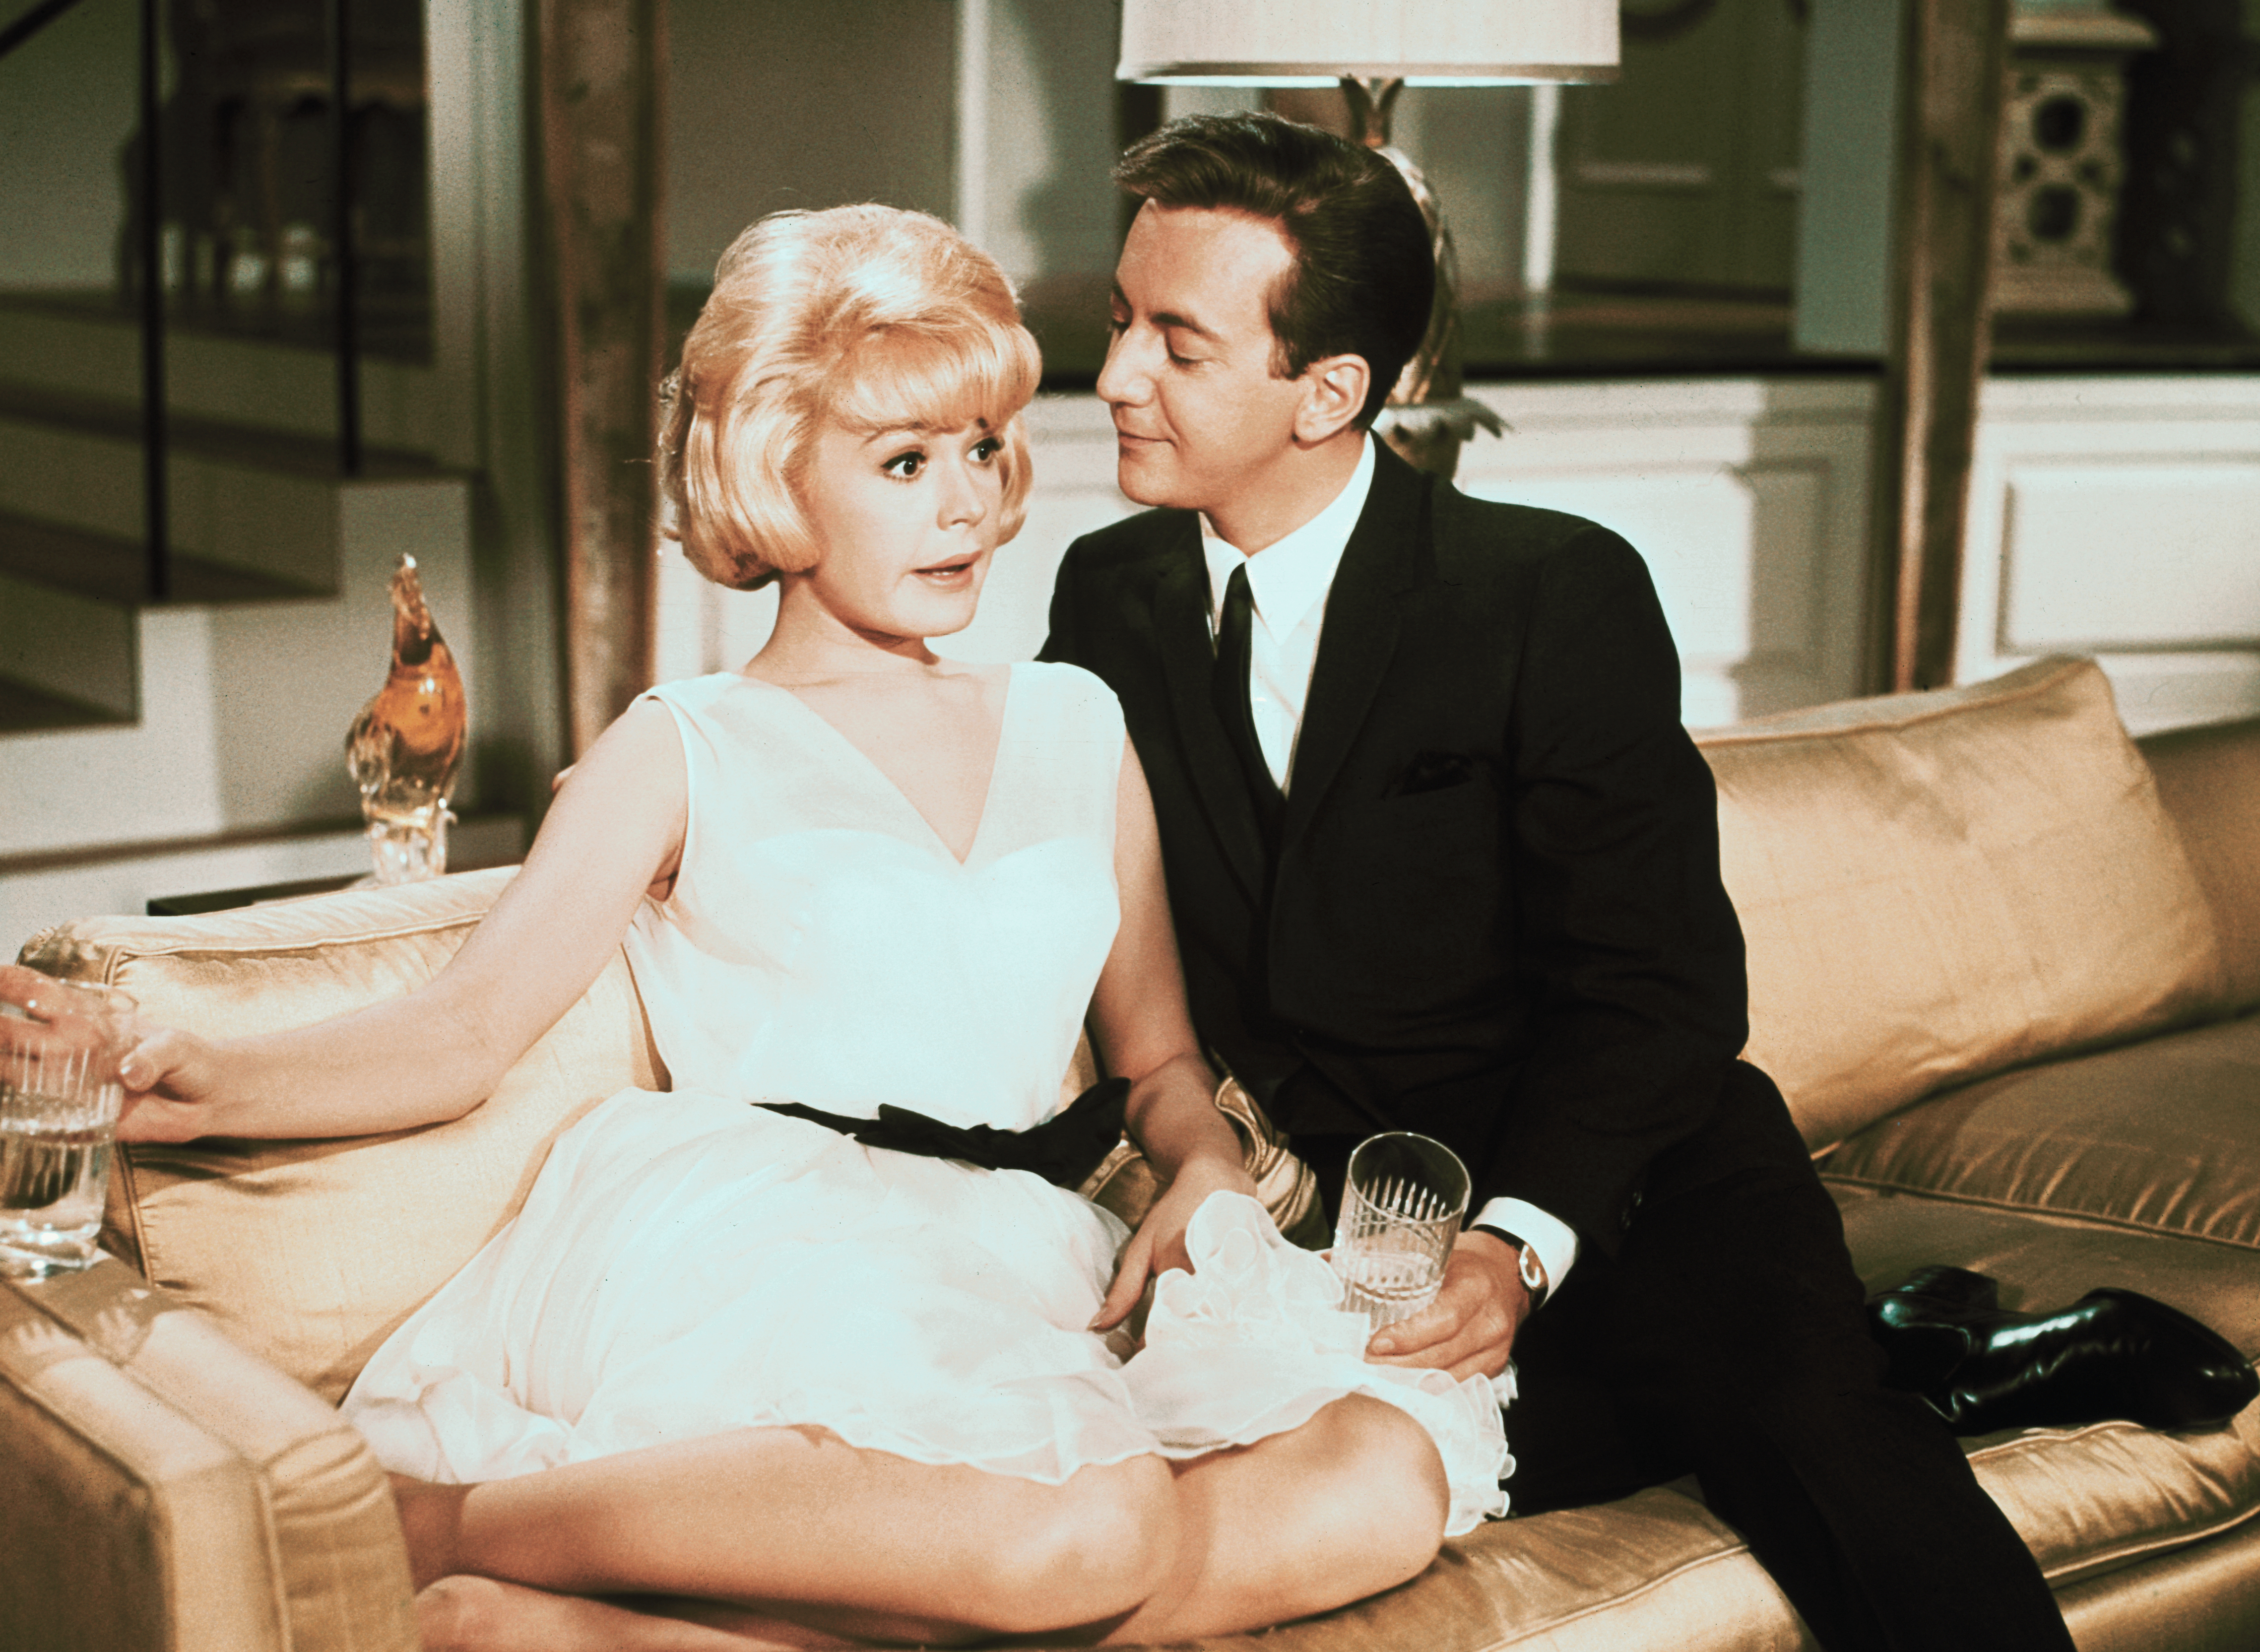 Sandra Dee and Bobby Darin in a scene from the rom-com "That Funny Feeling" in 1965 | Source: Getty Images